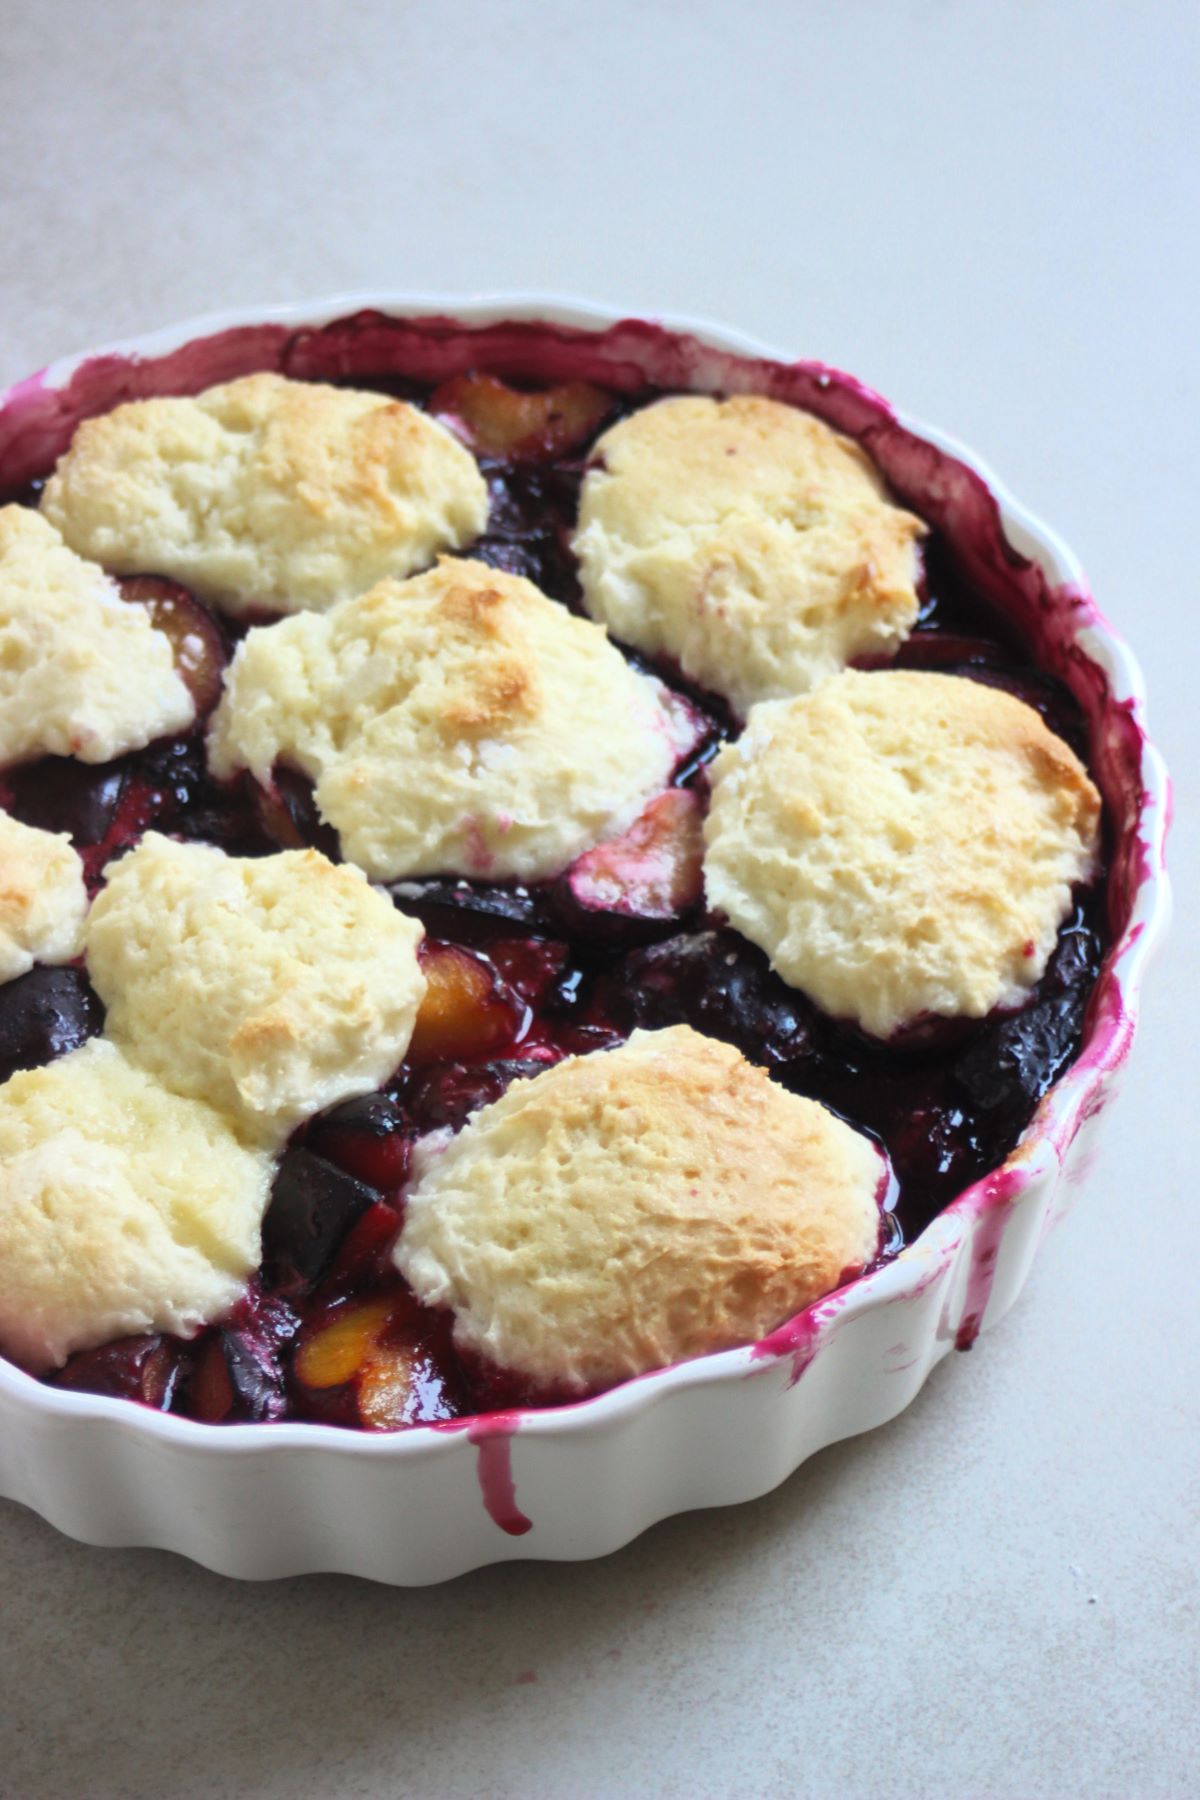 Round baking pan with plum cobbler on a white surface.